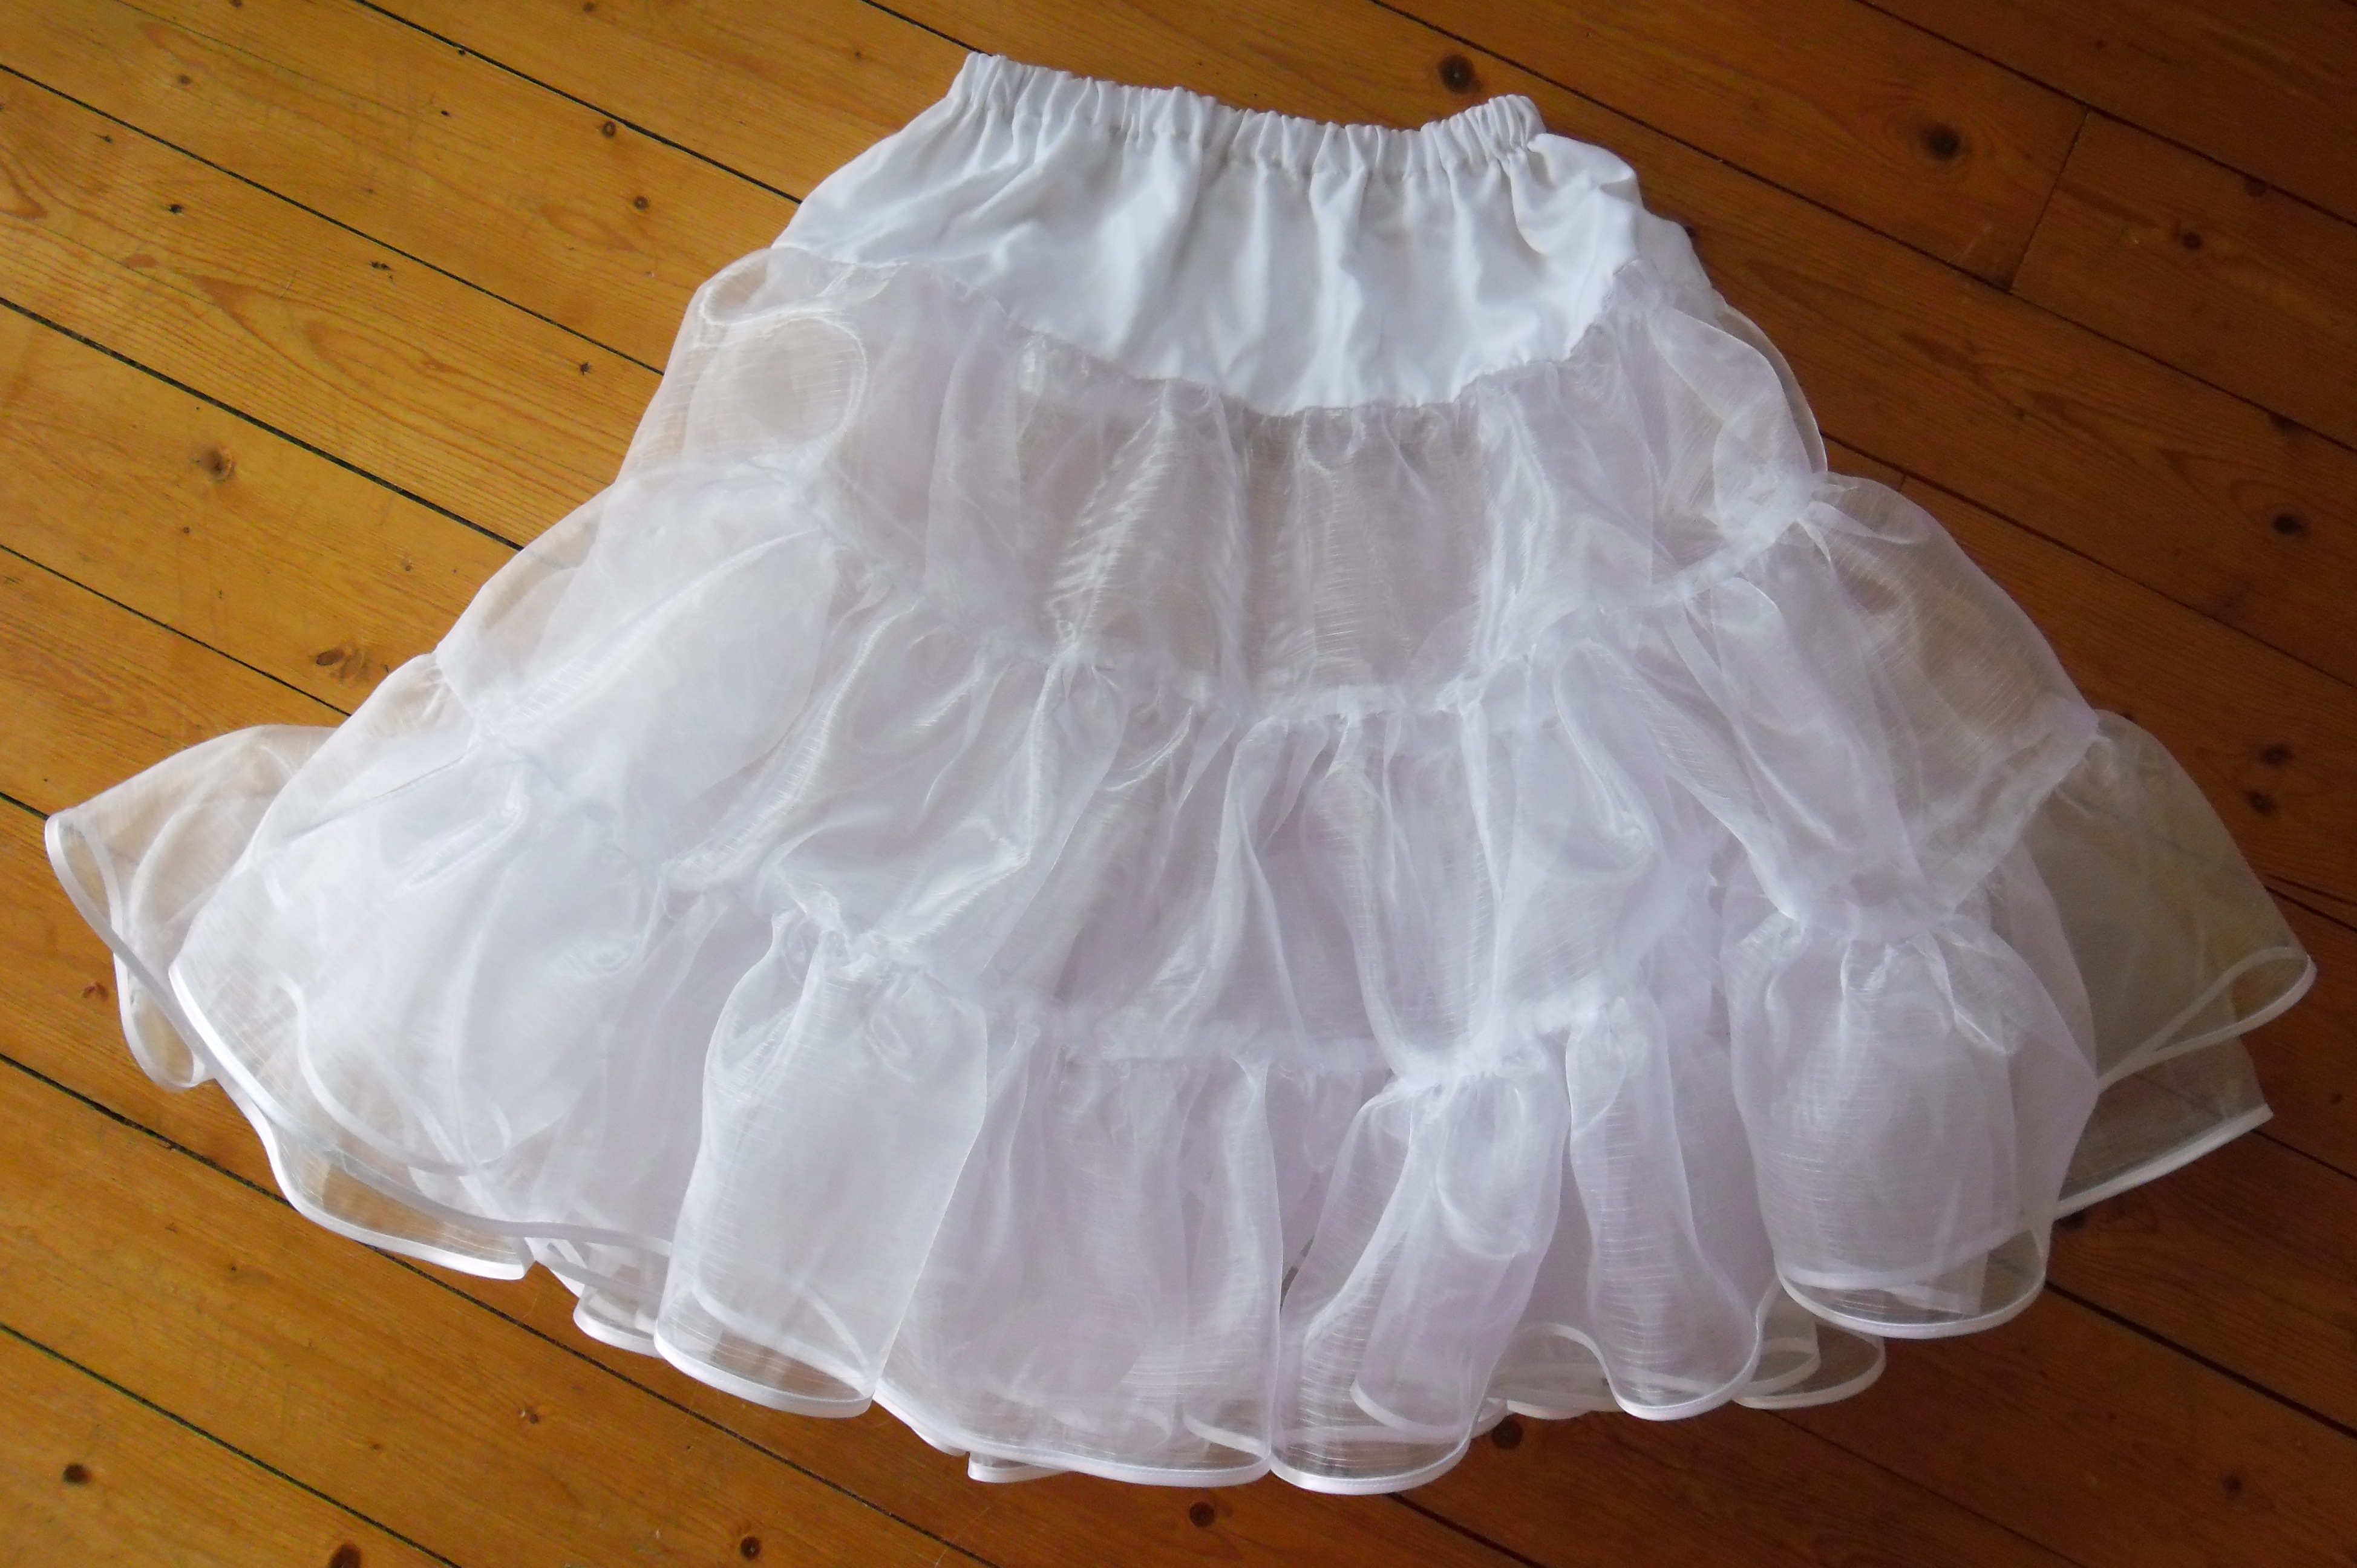 My best friend's wedding part 2: The petticoat. – Sewing Projects